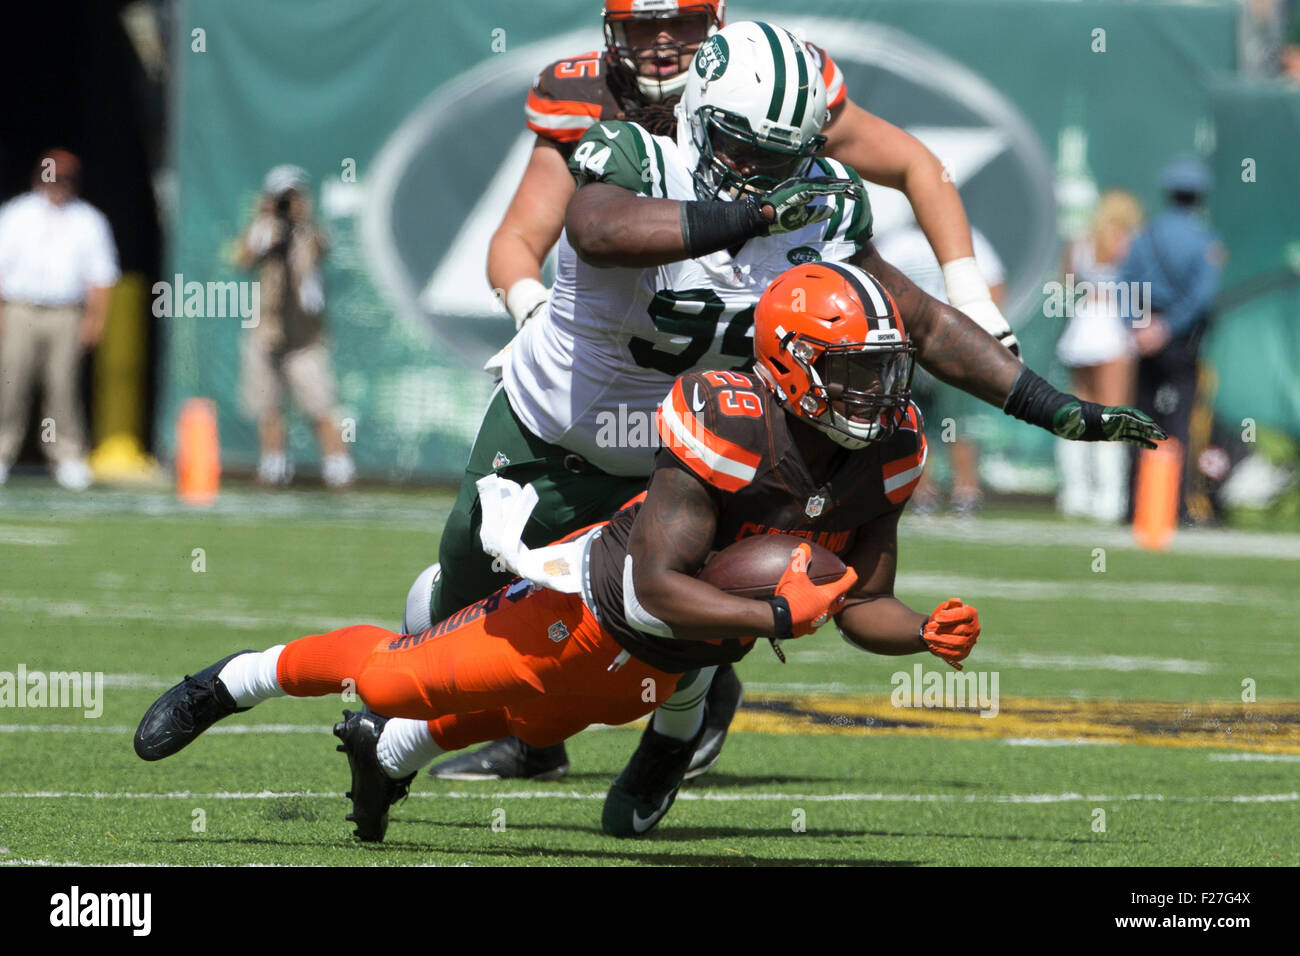 September 13, 2015, Cleveland Browns running back Duke Johnson (29) in action against New York Jets nose tackle Damon Harrison (94) during the NFL game between the Cleveland Browns and the New York Jets at MetLife Stadium in East Rutherford, New Jersey. Christopher Szagola/CSM Stock Photo